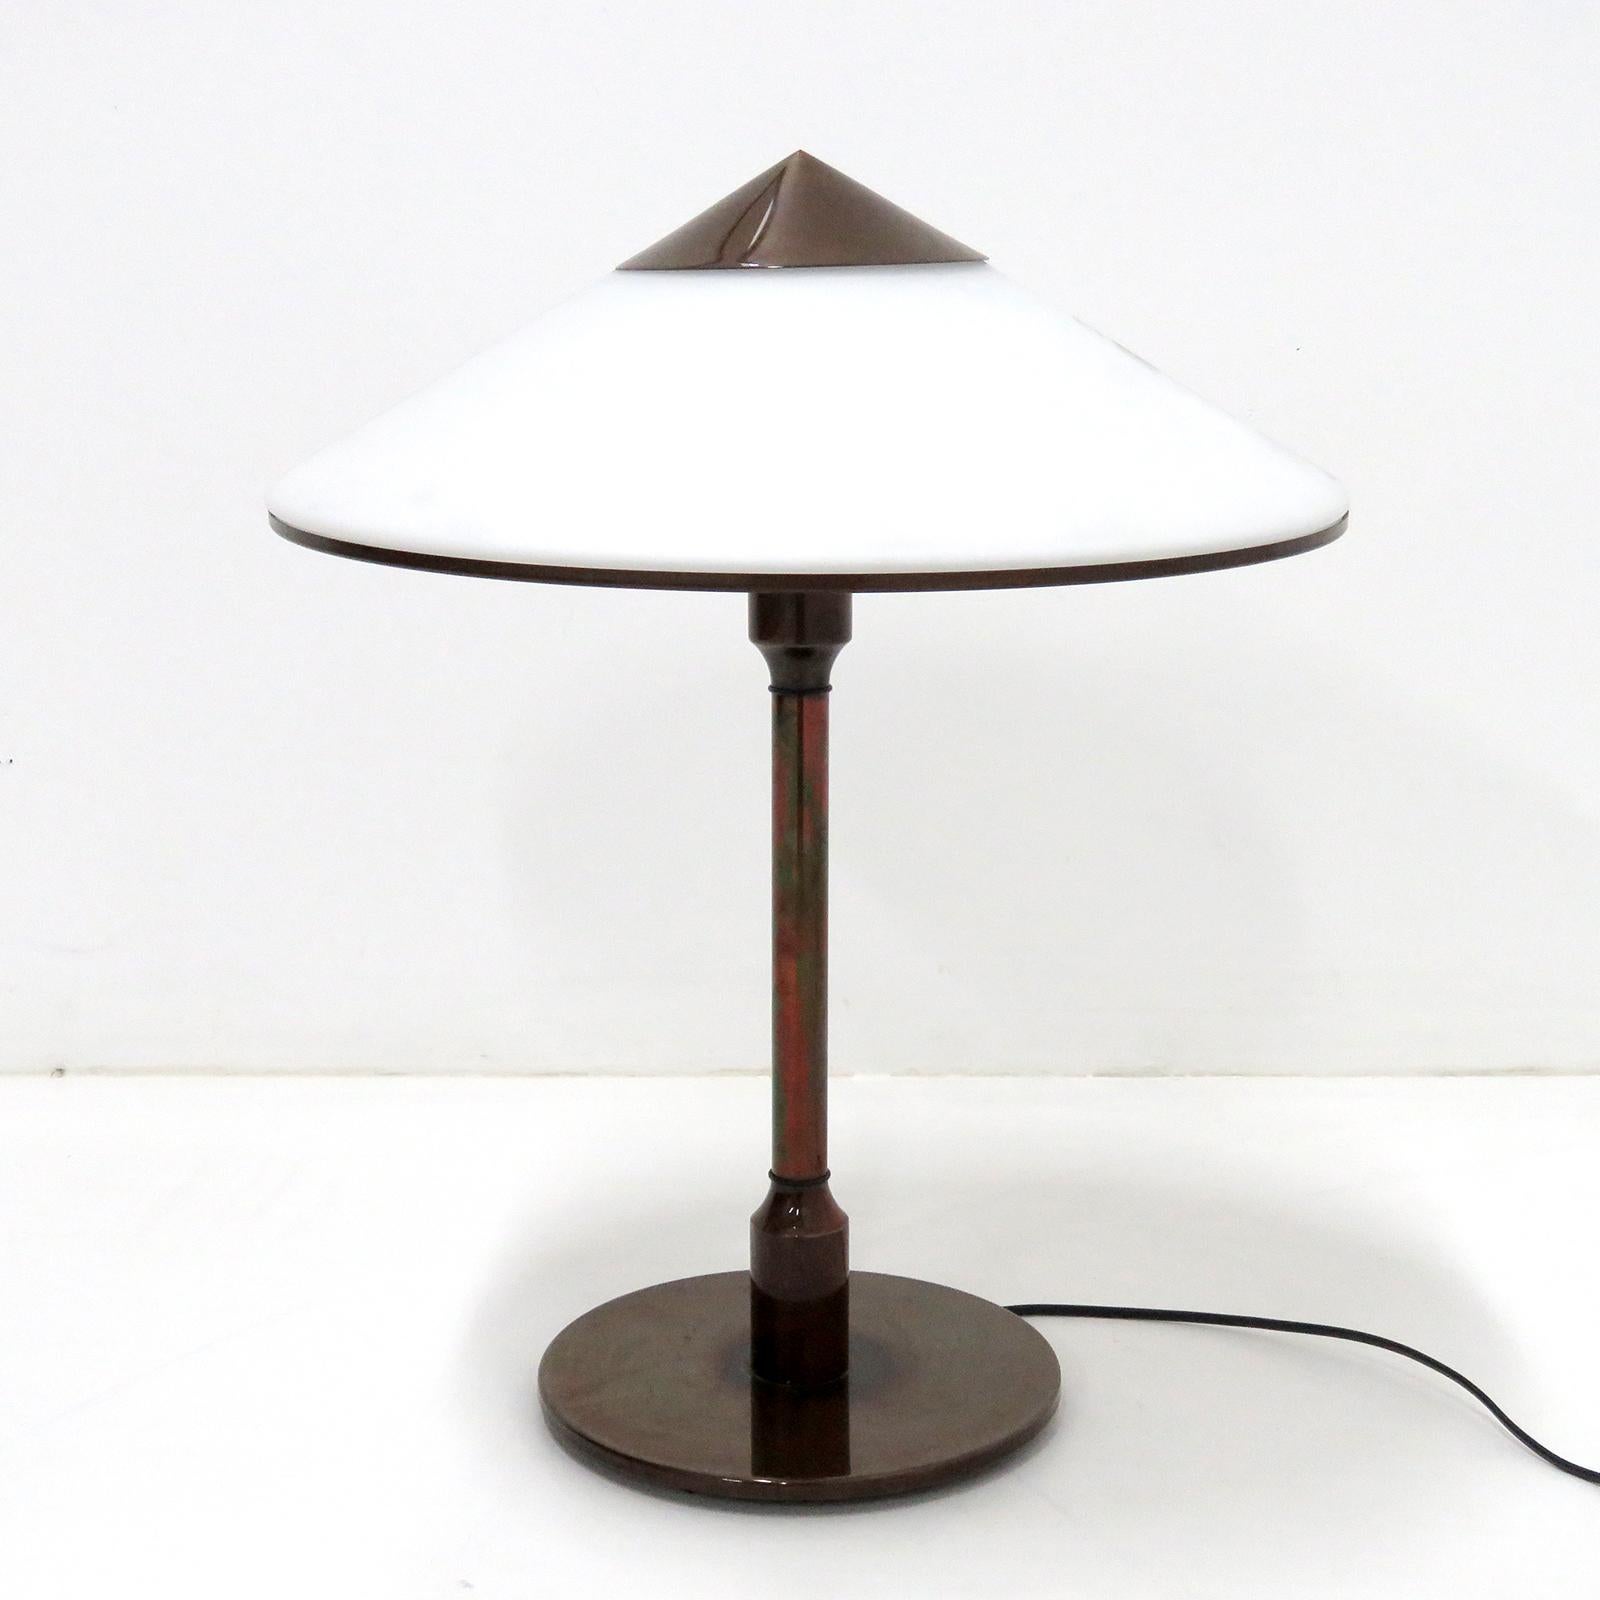 Elegant table lamp 'Kongelys' designed in 1937 by Niels Rasmussen Thykier for Fog & Mørup, bronze colored brass base and shade cap/trim with a white glass shade, individual on/off switch on the top of the stem, limited edition produced by Horn